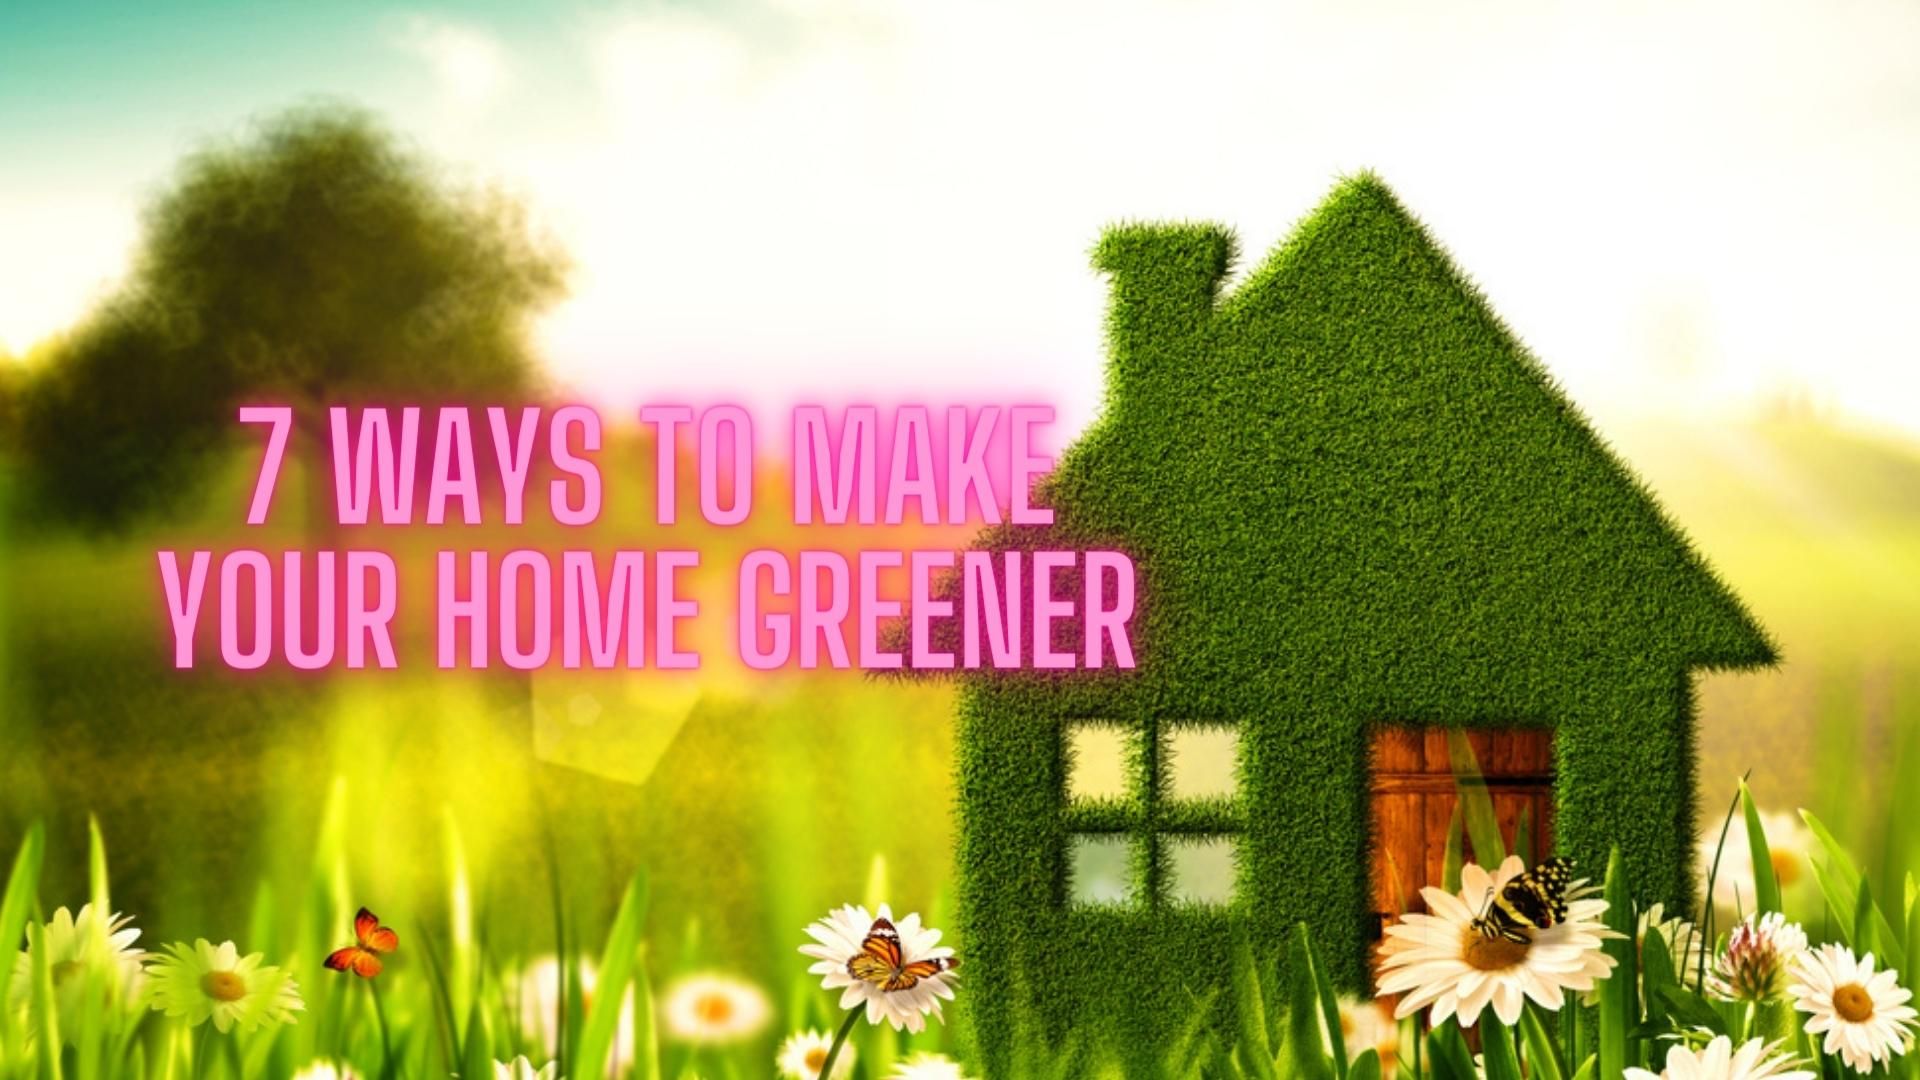 VIDEO: 7 Ways To Make Your Home Greener